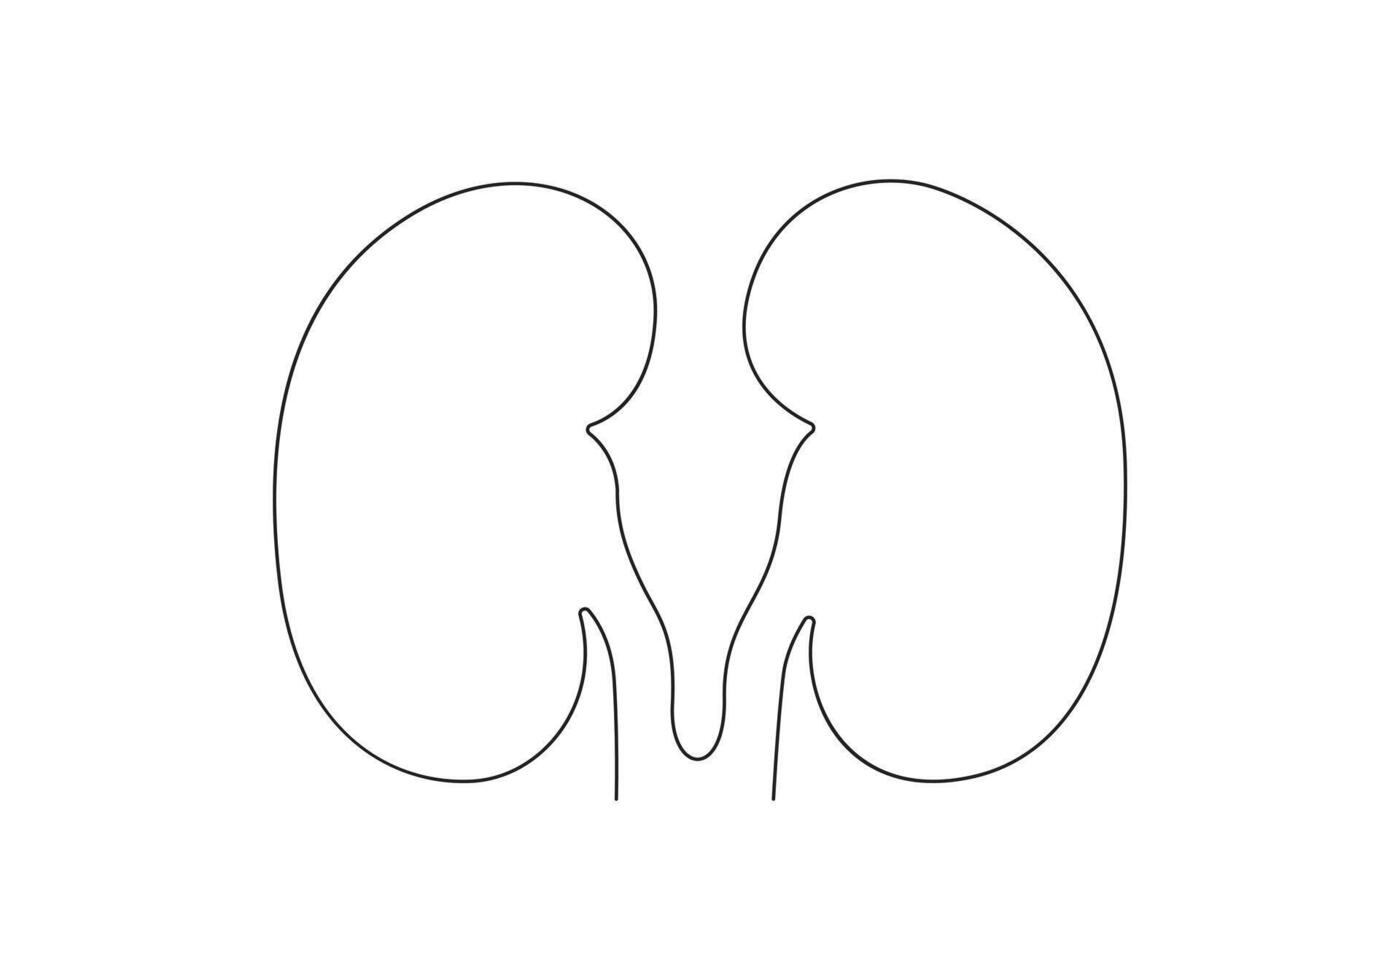 Continuous one line drawing of human kidney digital illustration vector